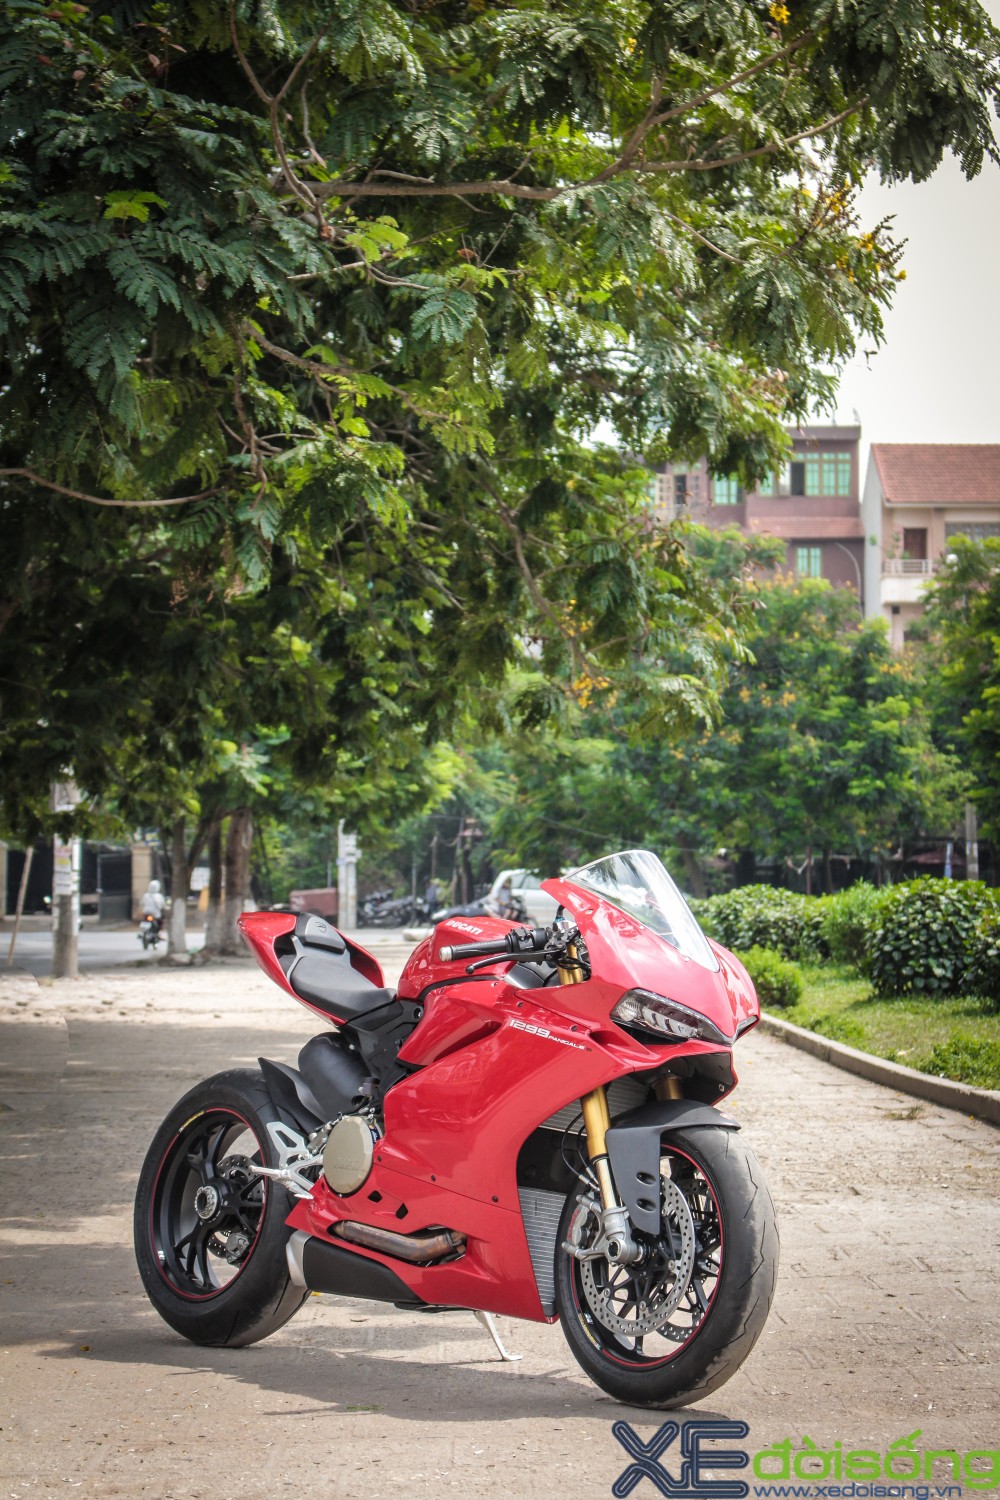 Can canh Ducati 1299 Panigale S dau tien tai Viet Nam voi gia 1 ty dong - 3